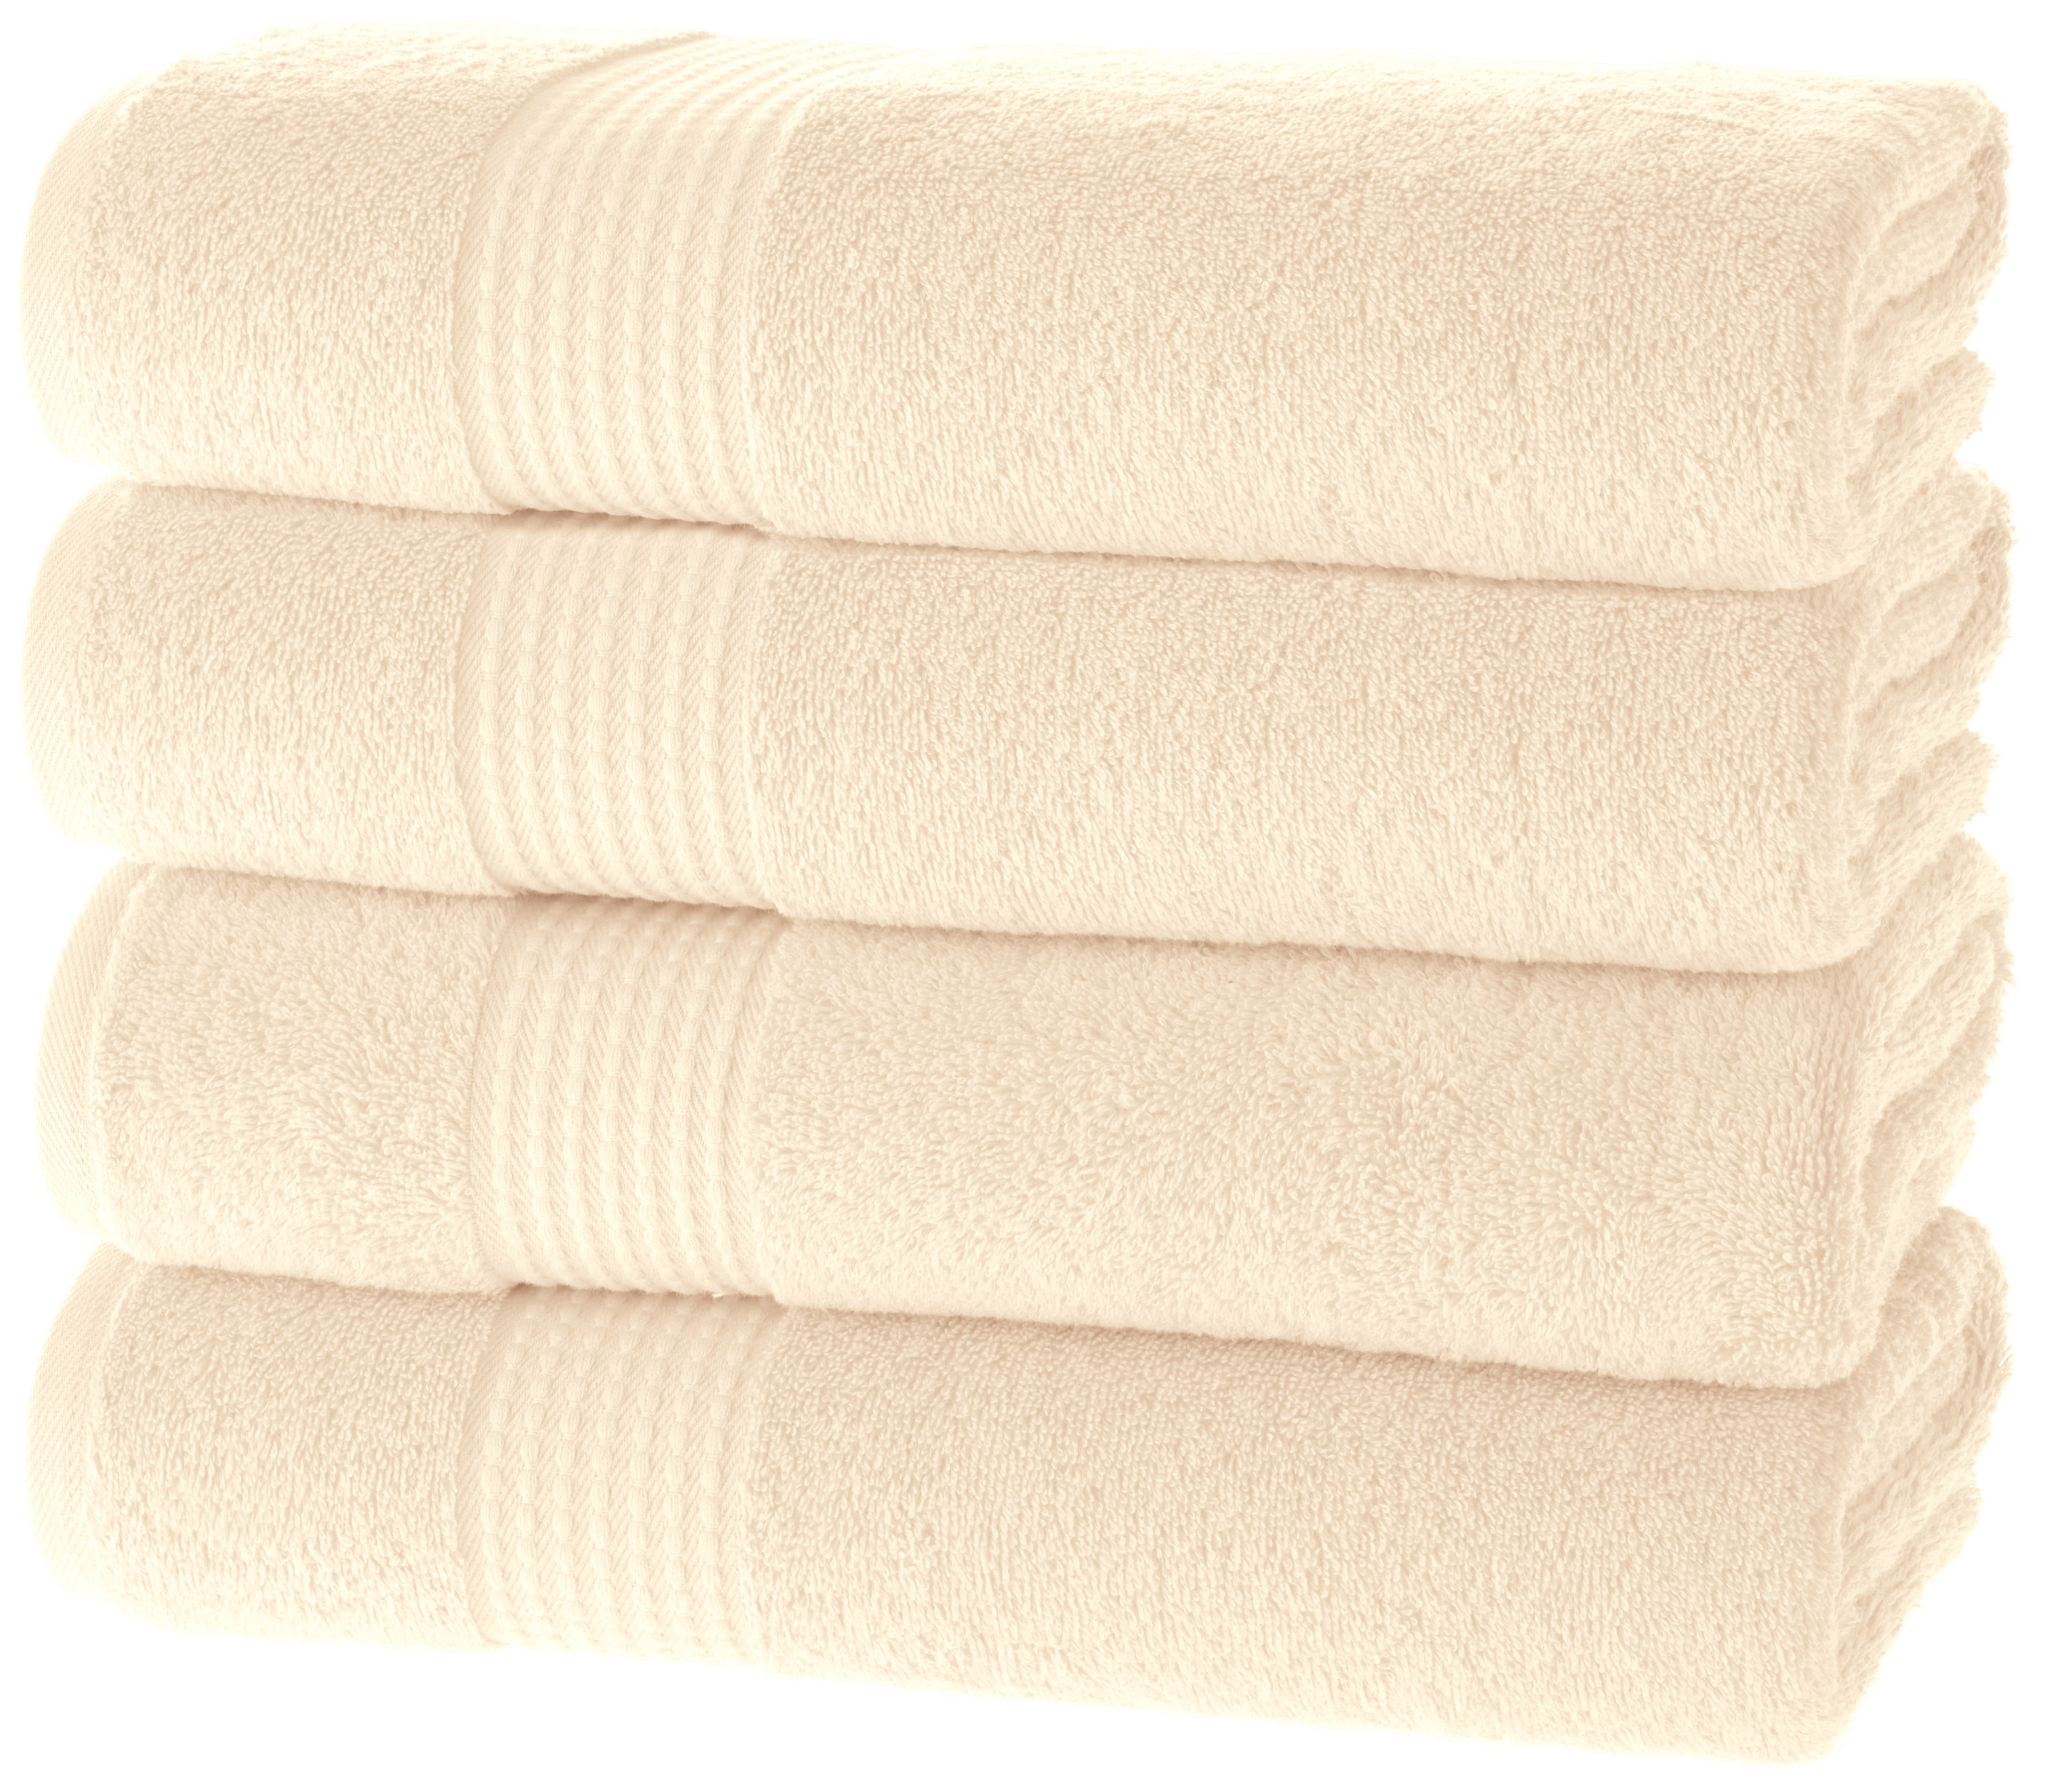 MAURA Basics Performance Bath Towels Set with Hanging Loop. American  Standard Towel size. Soft, Durable, Long Lasting and Absorbent 100% Turkish  Cotton Bath Towels Set for Bathroom 